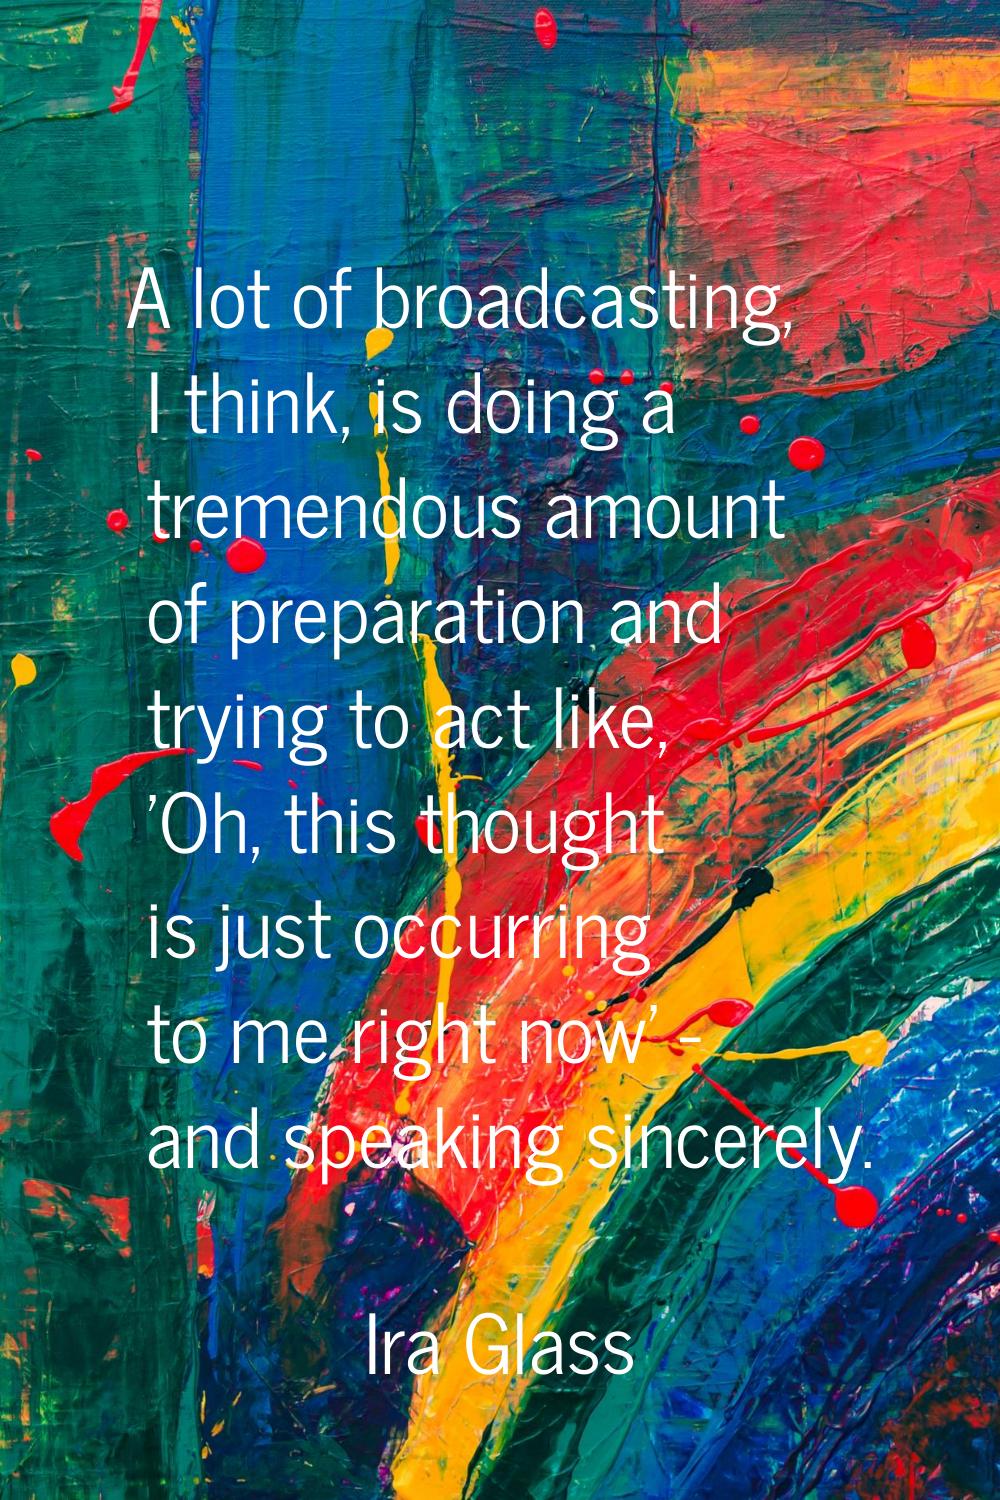 A lot of broadcasting, I think, is doing a tremendous amount of preparation and trying to act like,